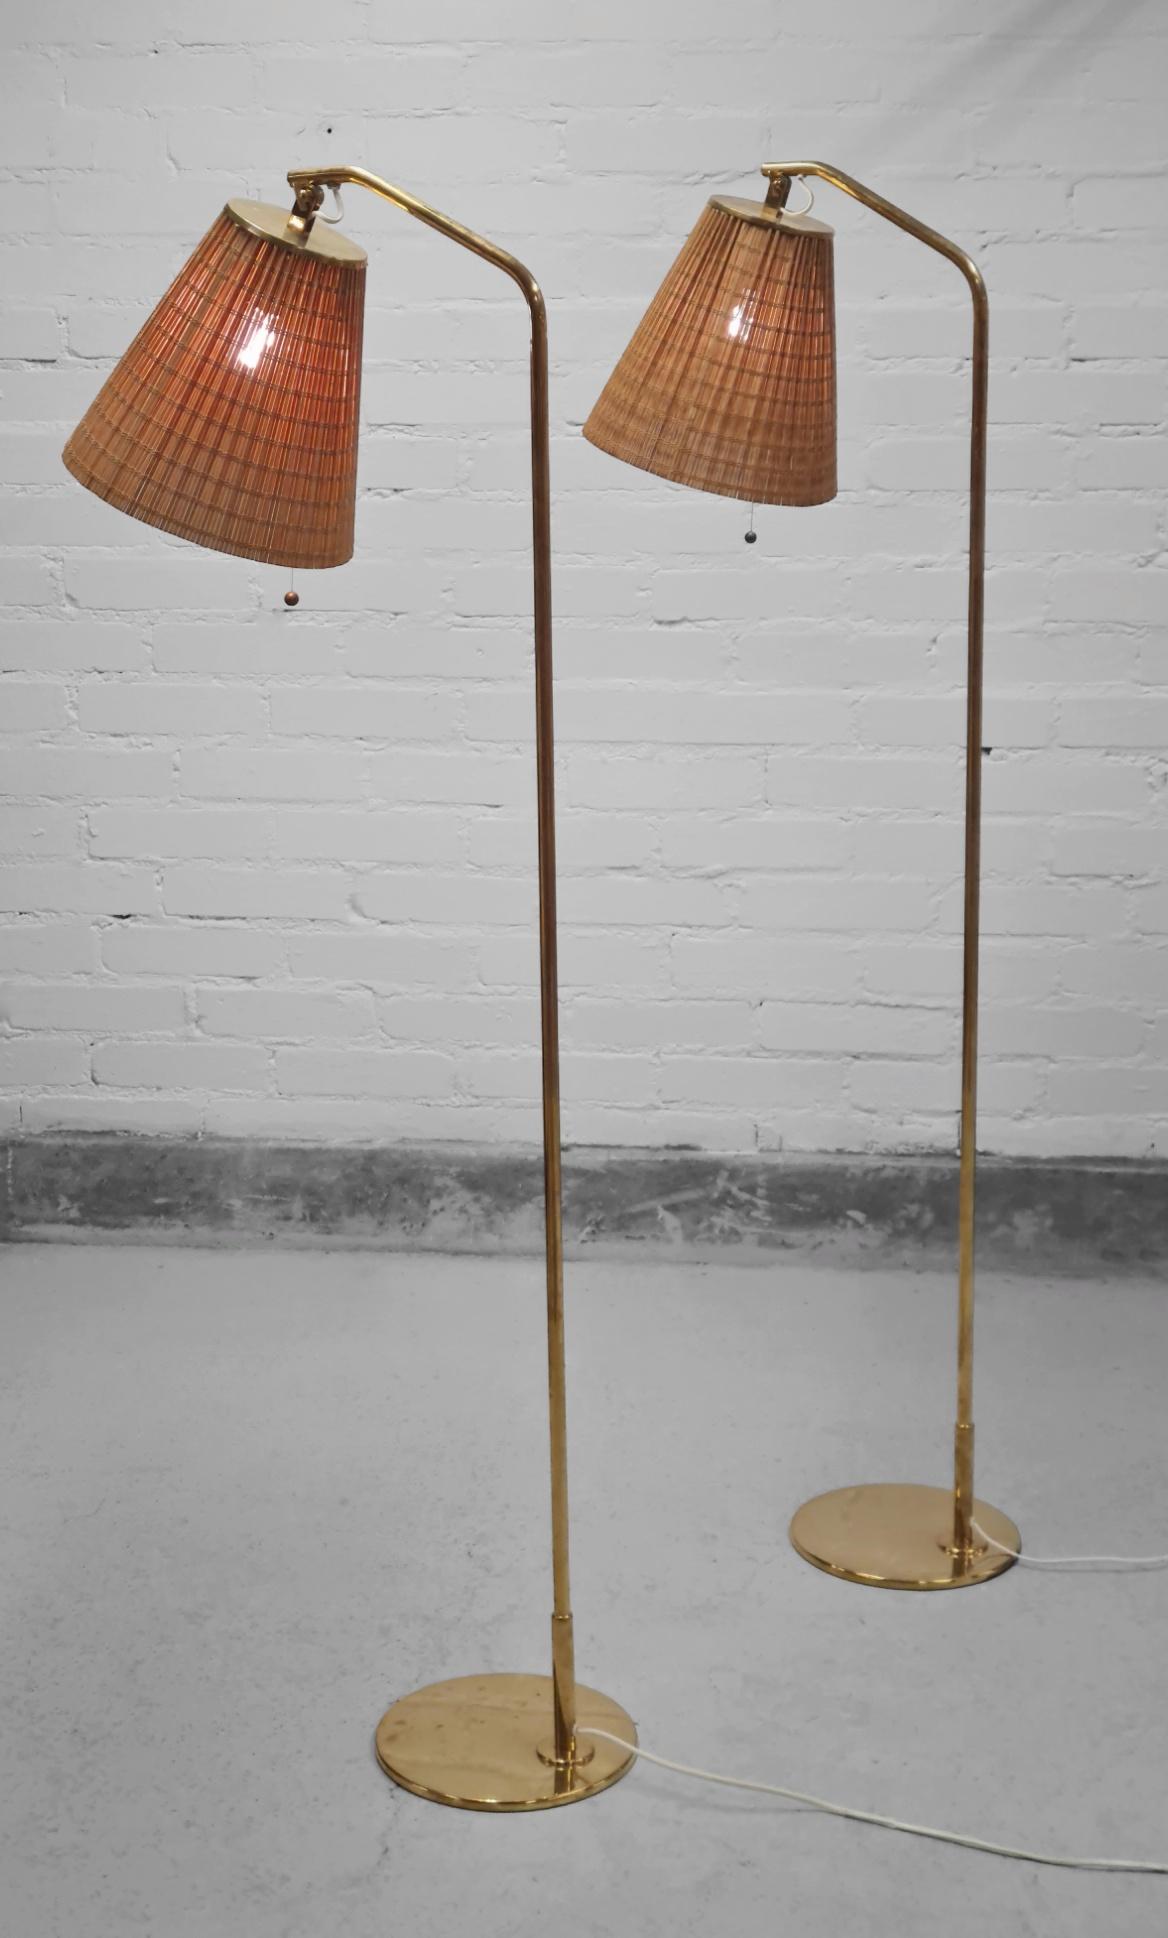 A sleek pair of floor lamps by master designer Paavo Tynell. These minimalistic floor lamps model 9613 carry elegance in their simplicity. The shades are adjustable which makes these lamps perfect for reading spaces, bedrooms or living room corners.